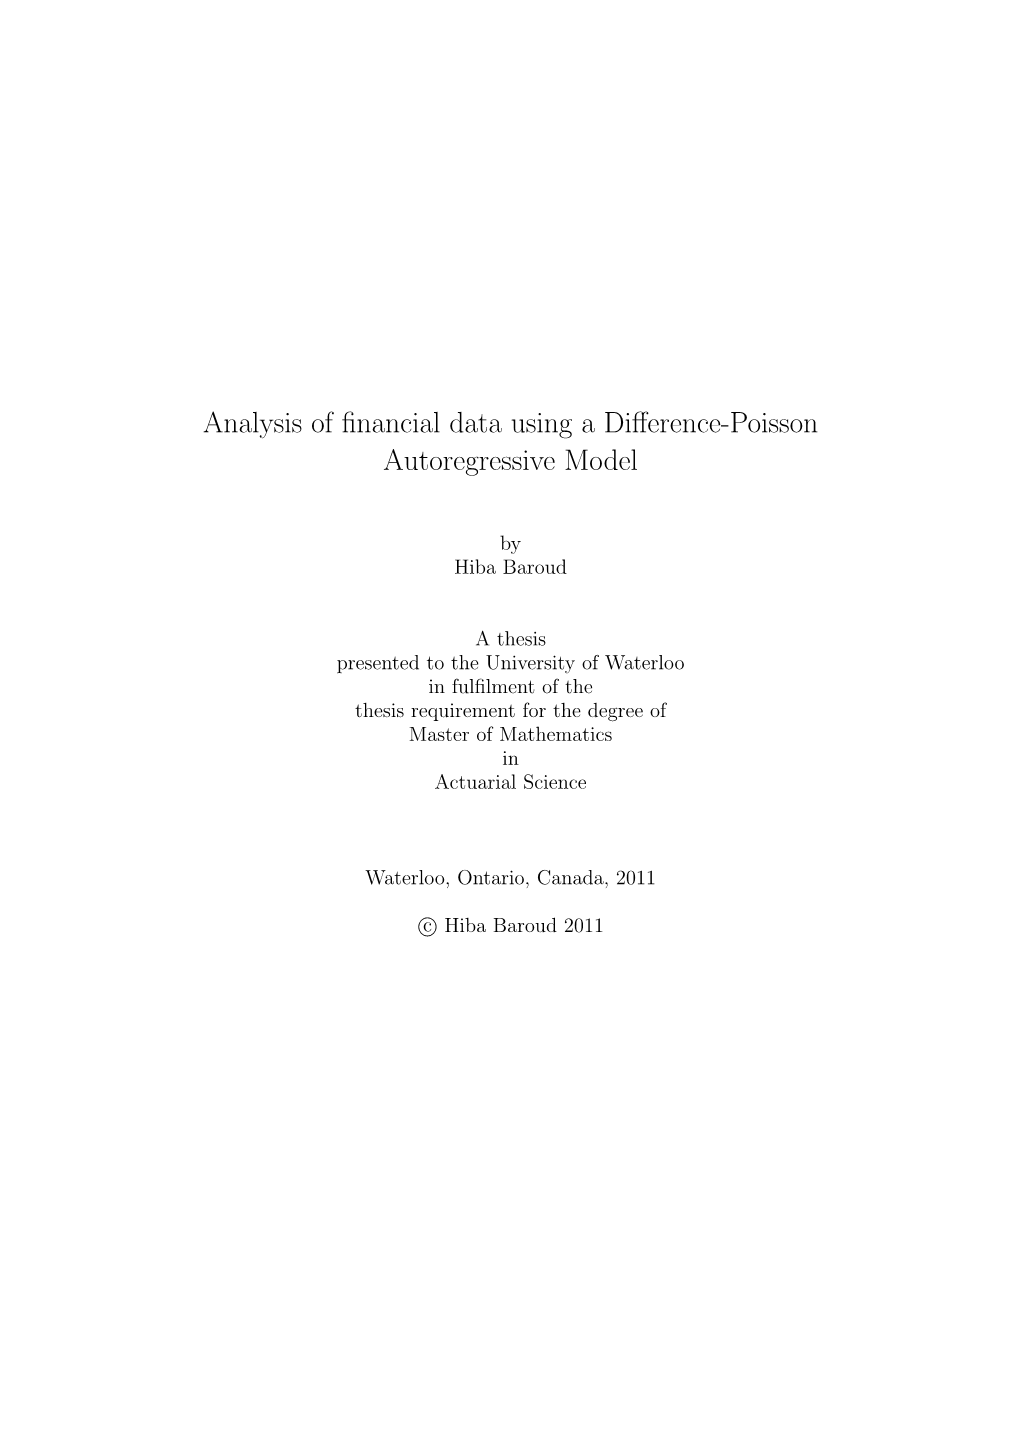 Analysis of Financial Data Using a Difference-Poisson Autoregressive Model